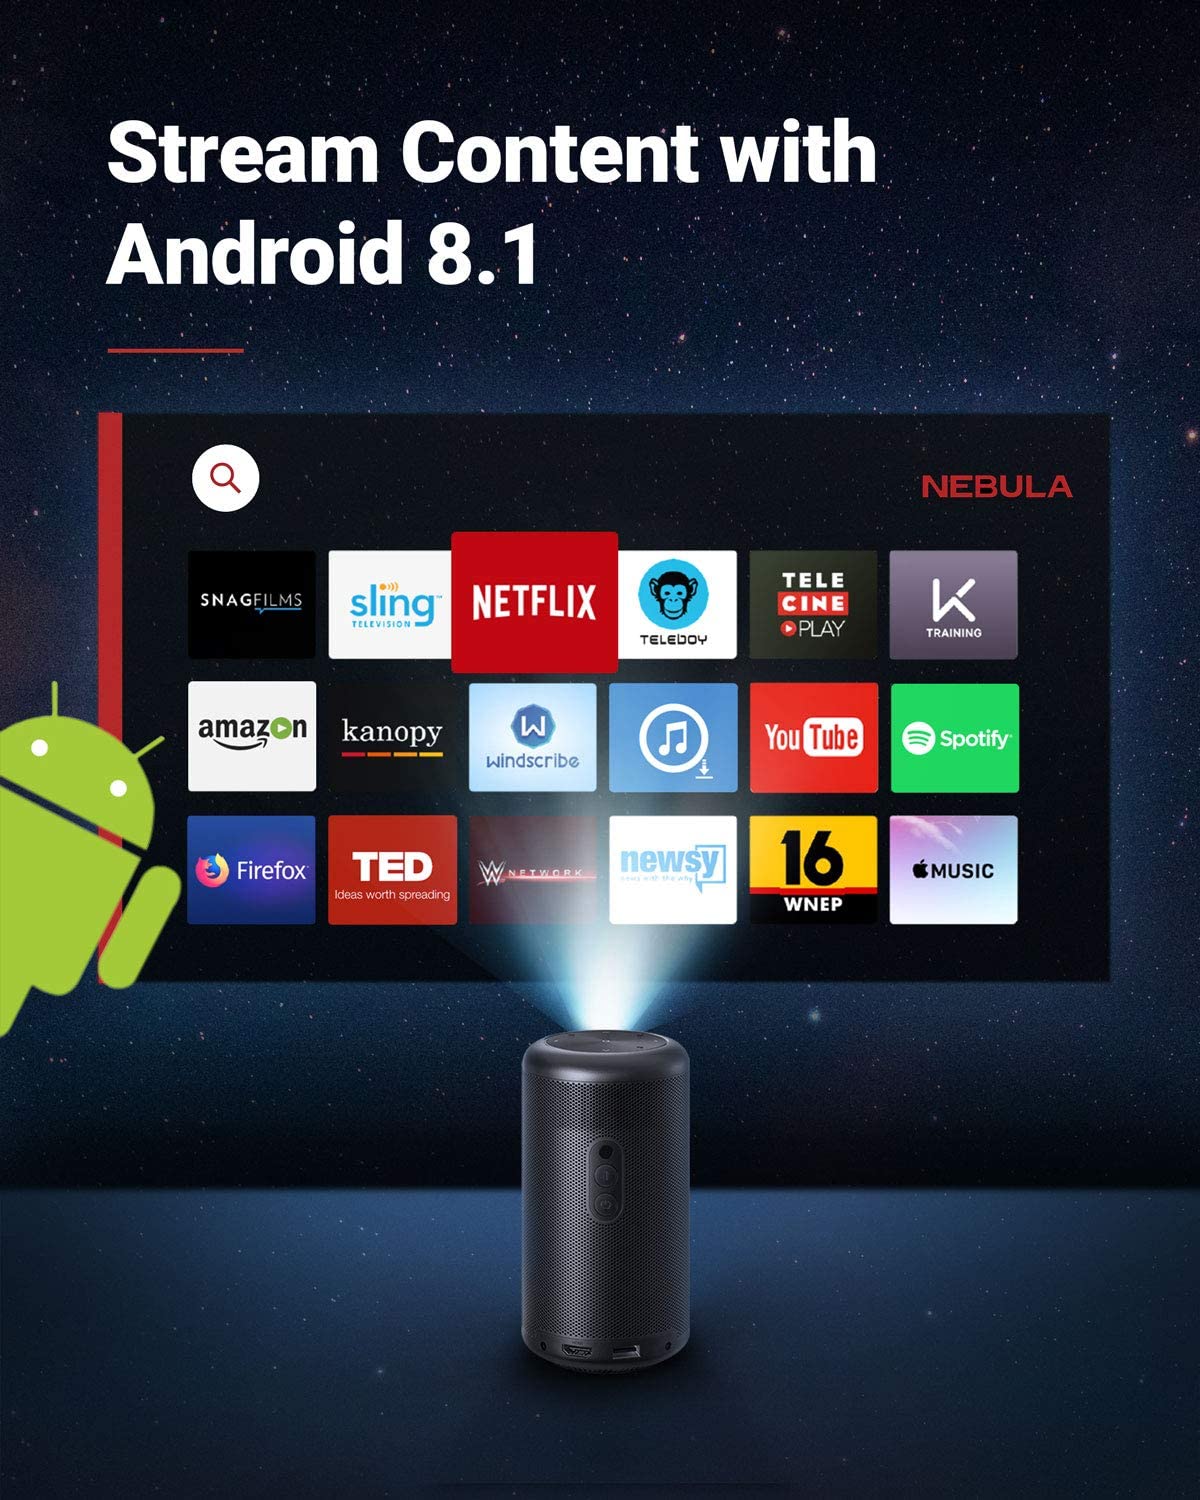 A Capsule Max portable projector displays Android 8.1 content onto a screen with the Android mascot peering nearby.